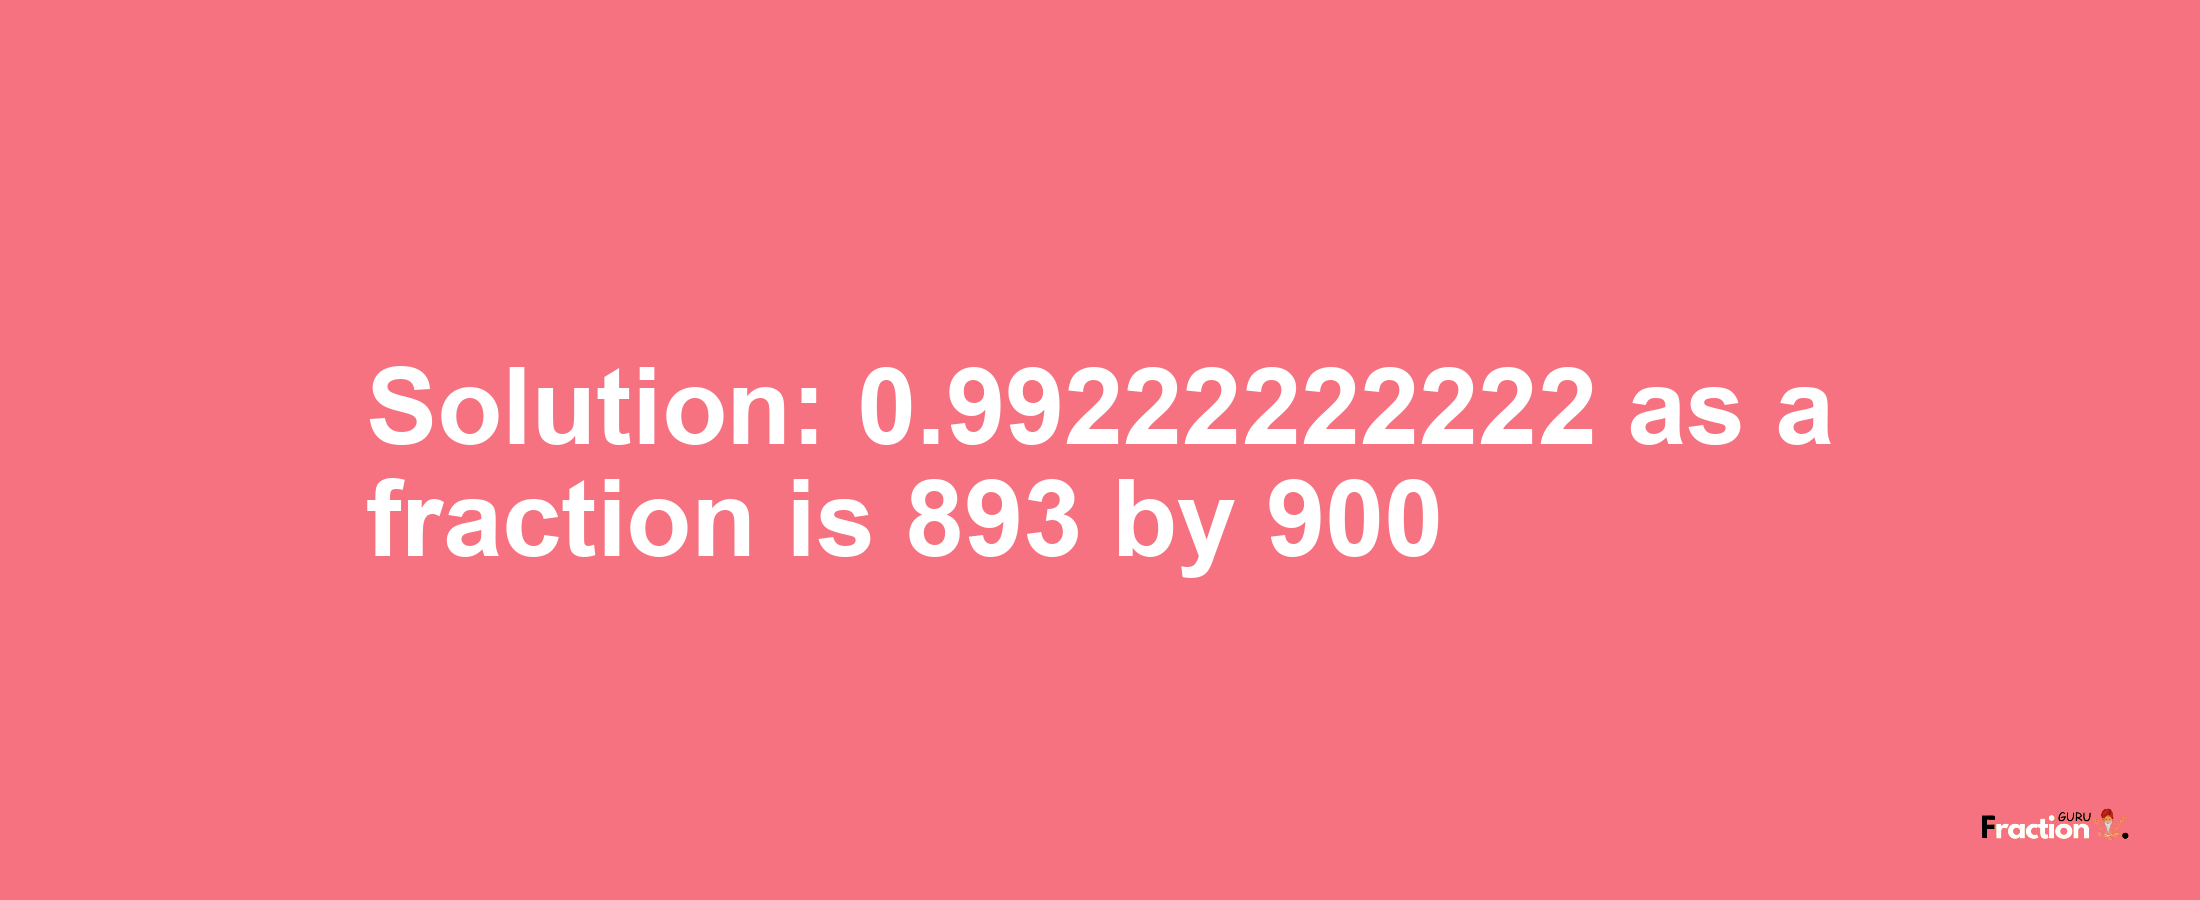 Solution:0.99222222222 as a fraction is 893/900